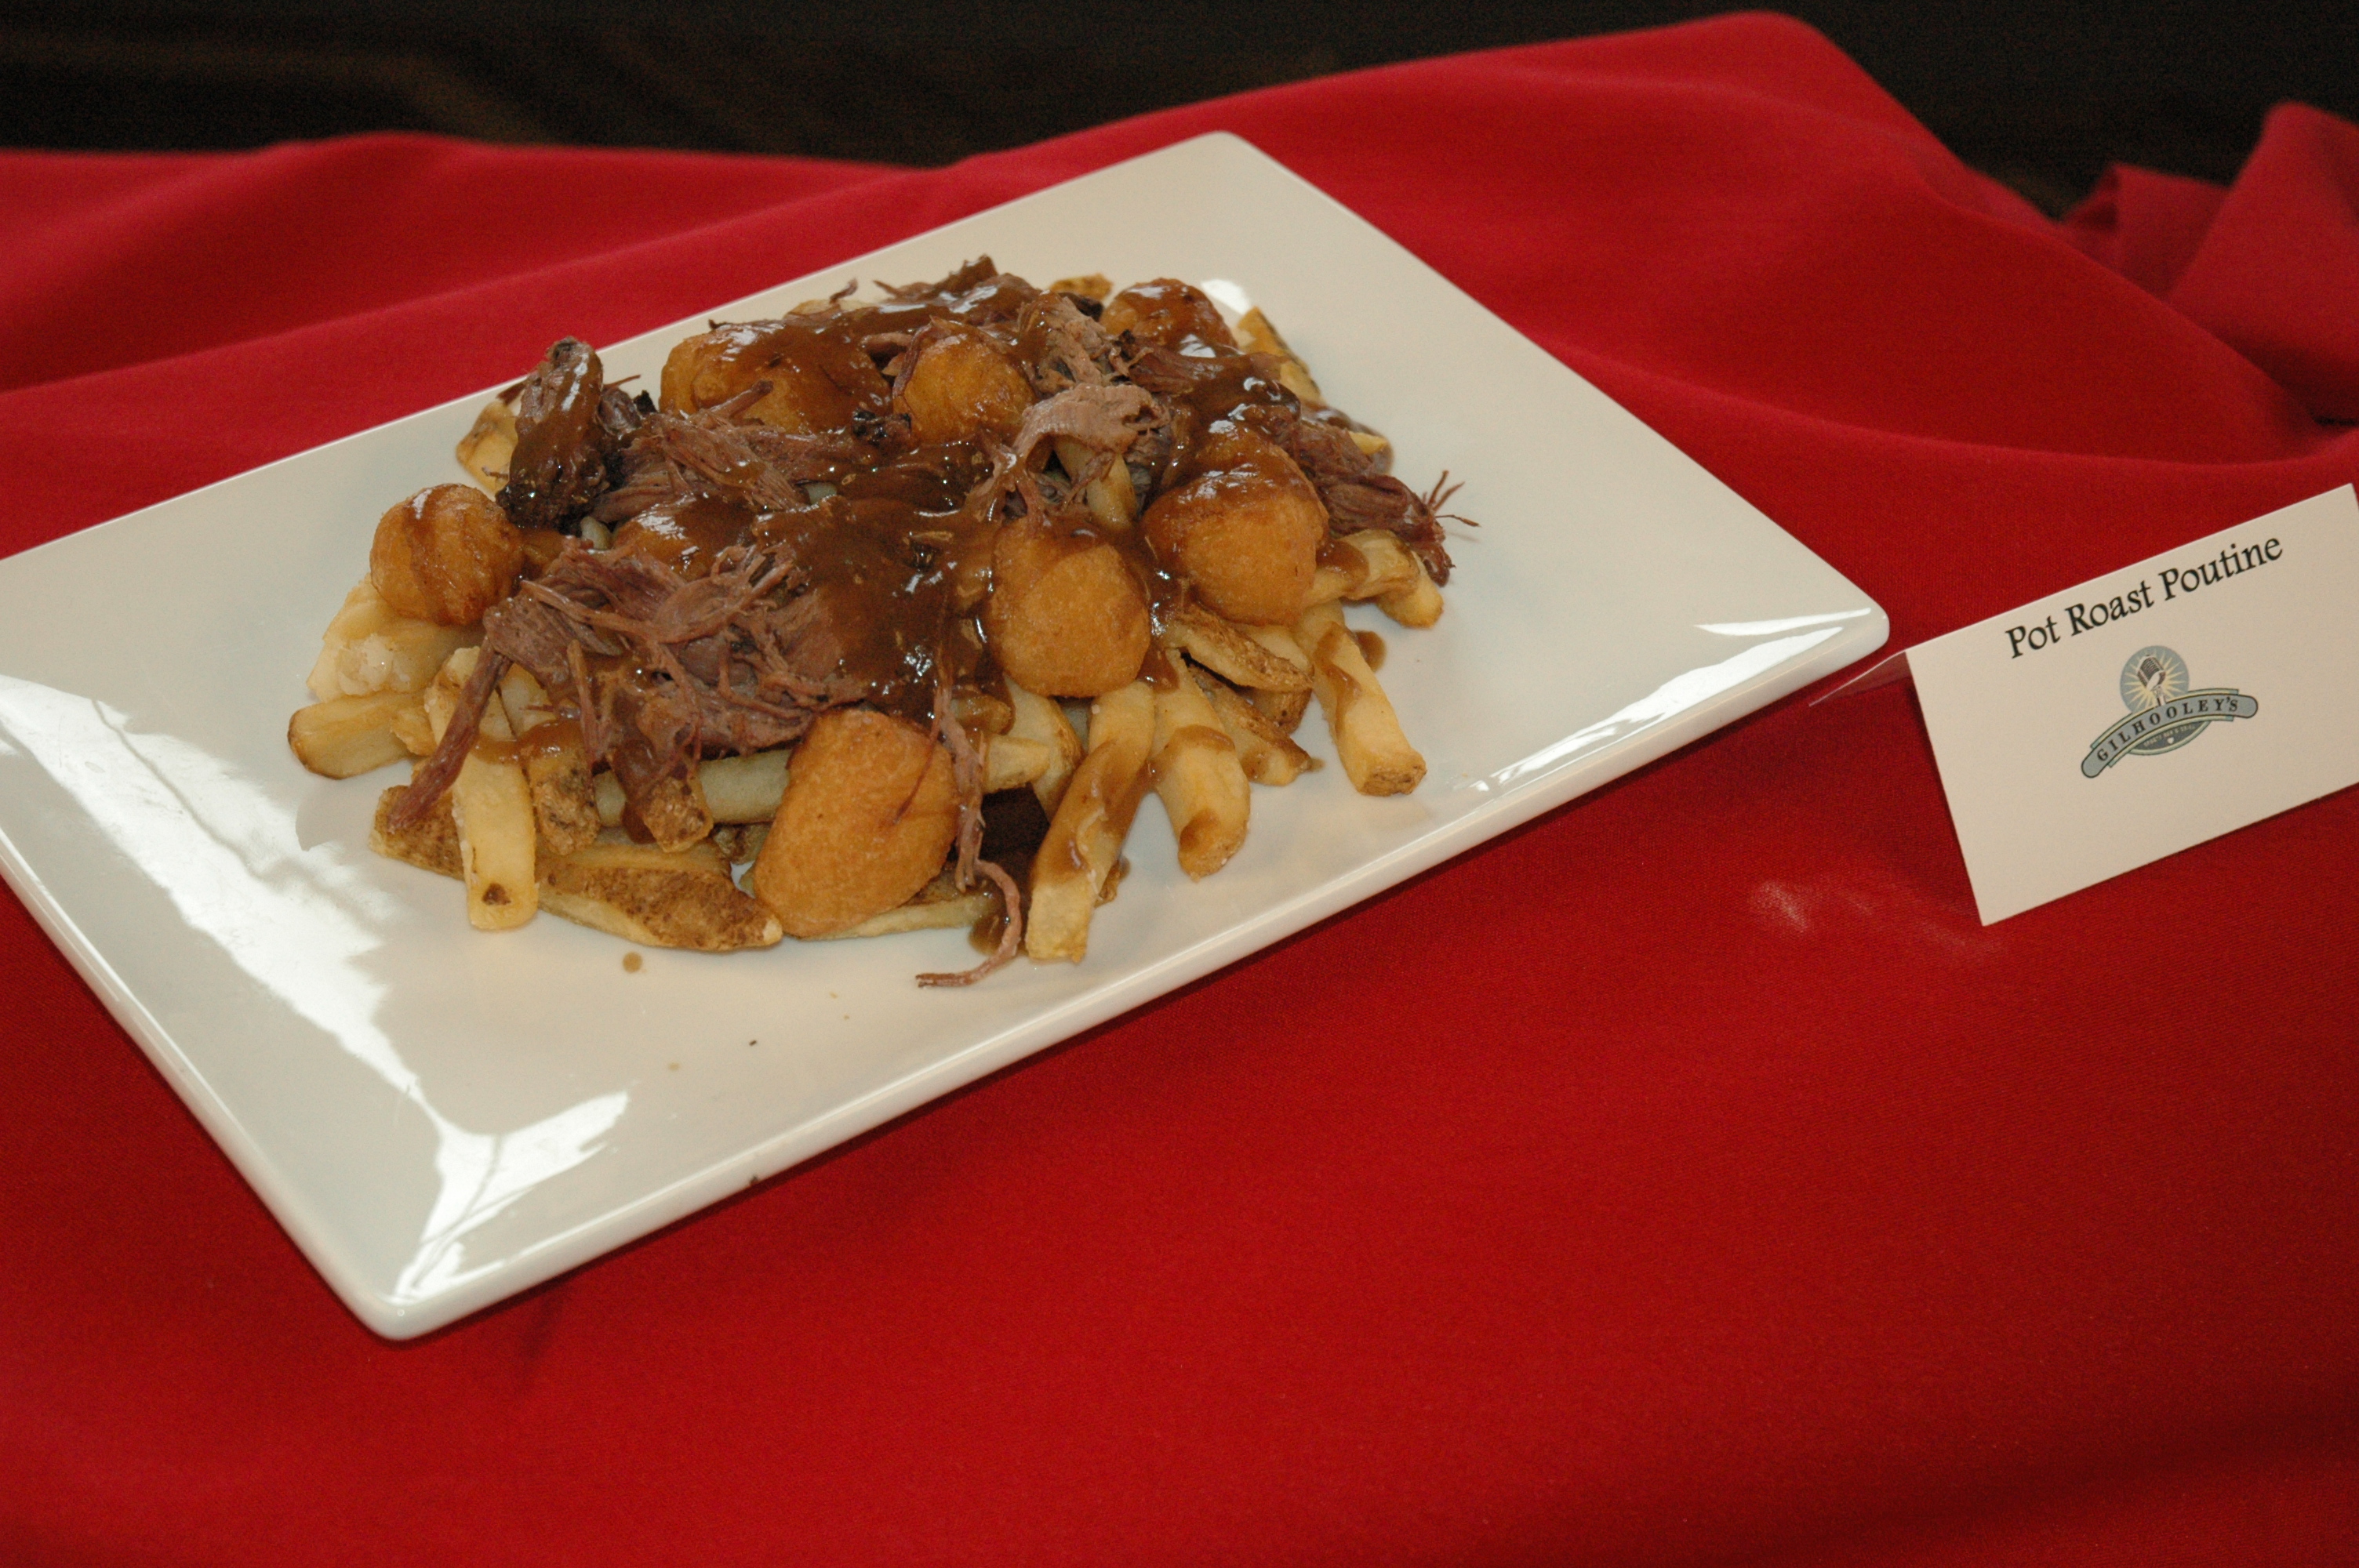 A home run dish, the new Pot Roast Poutine sits on a bed of french-fries and is covered in a gravy-esque sauce that will knock your taste buds right out of the park.